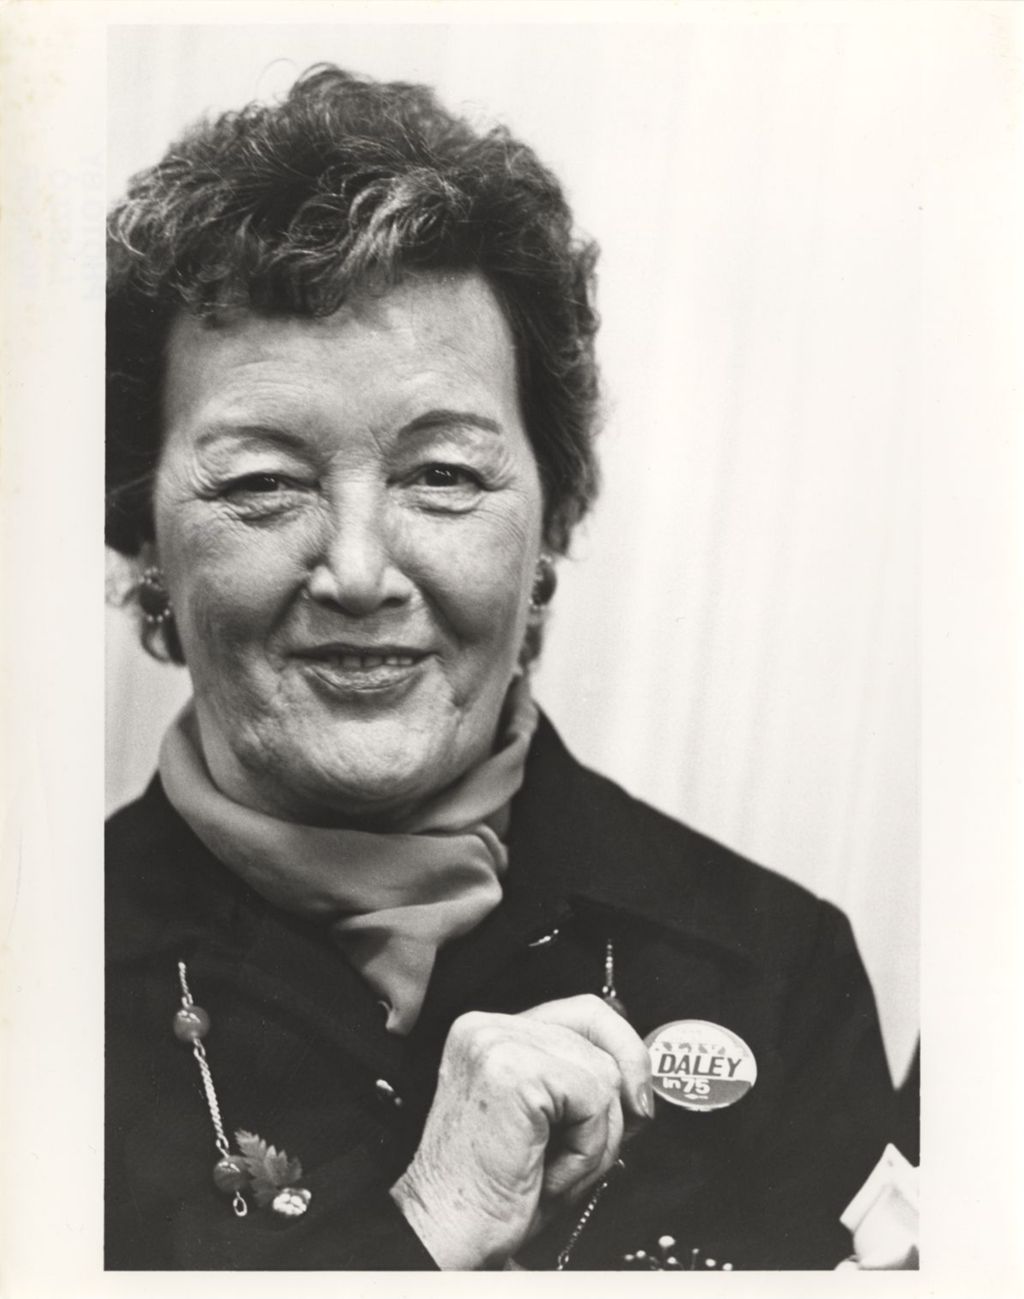 Eleanor Daley wearing a Daley campaign button